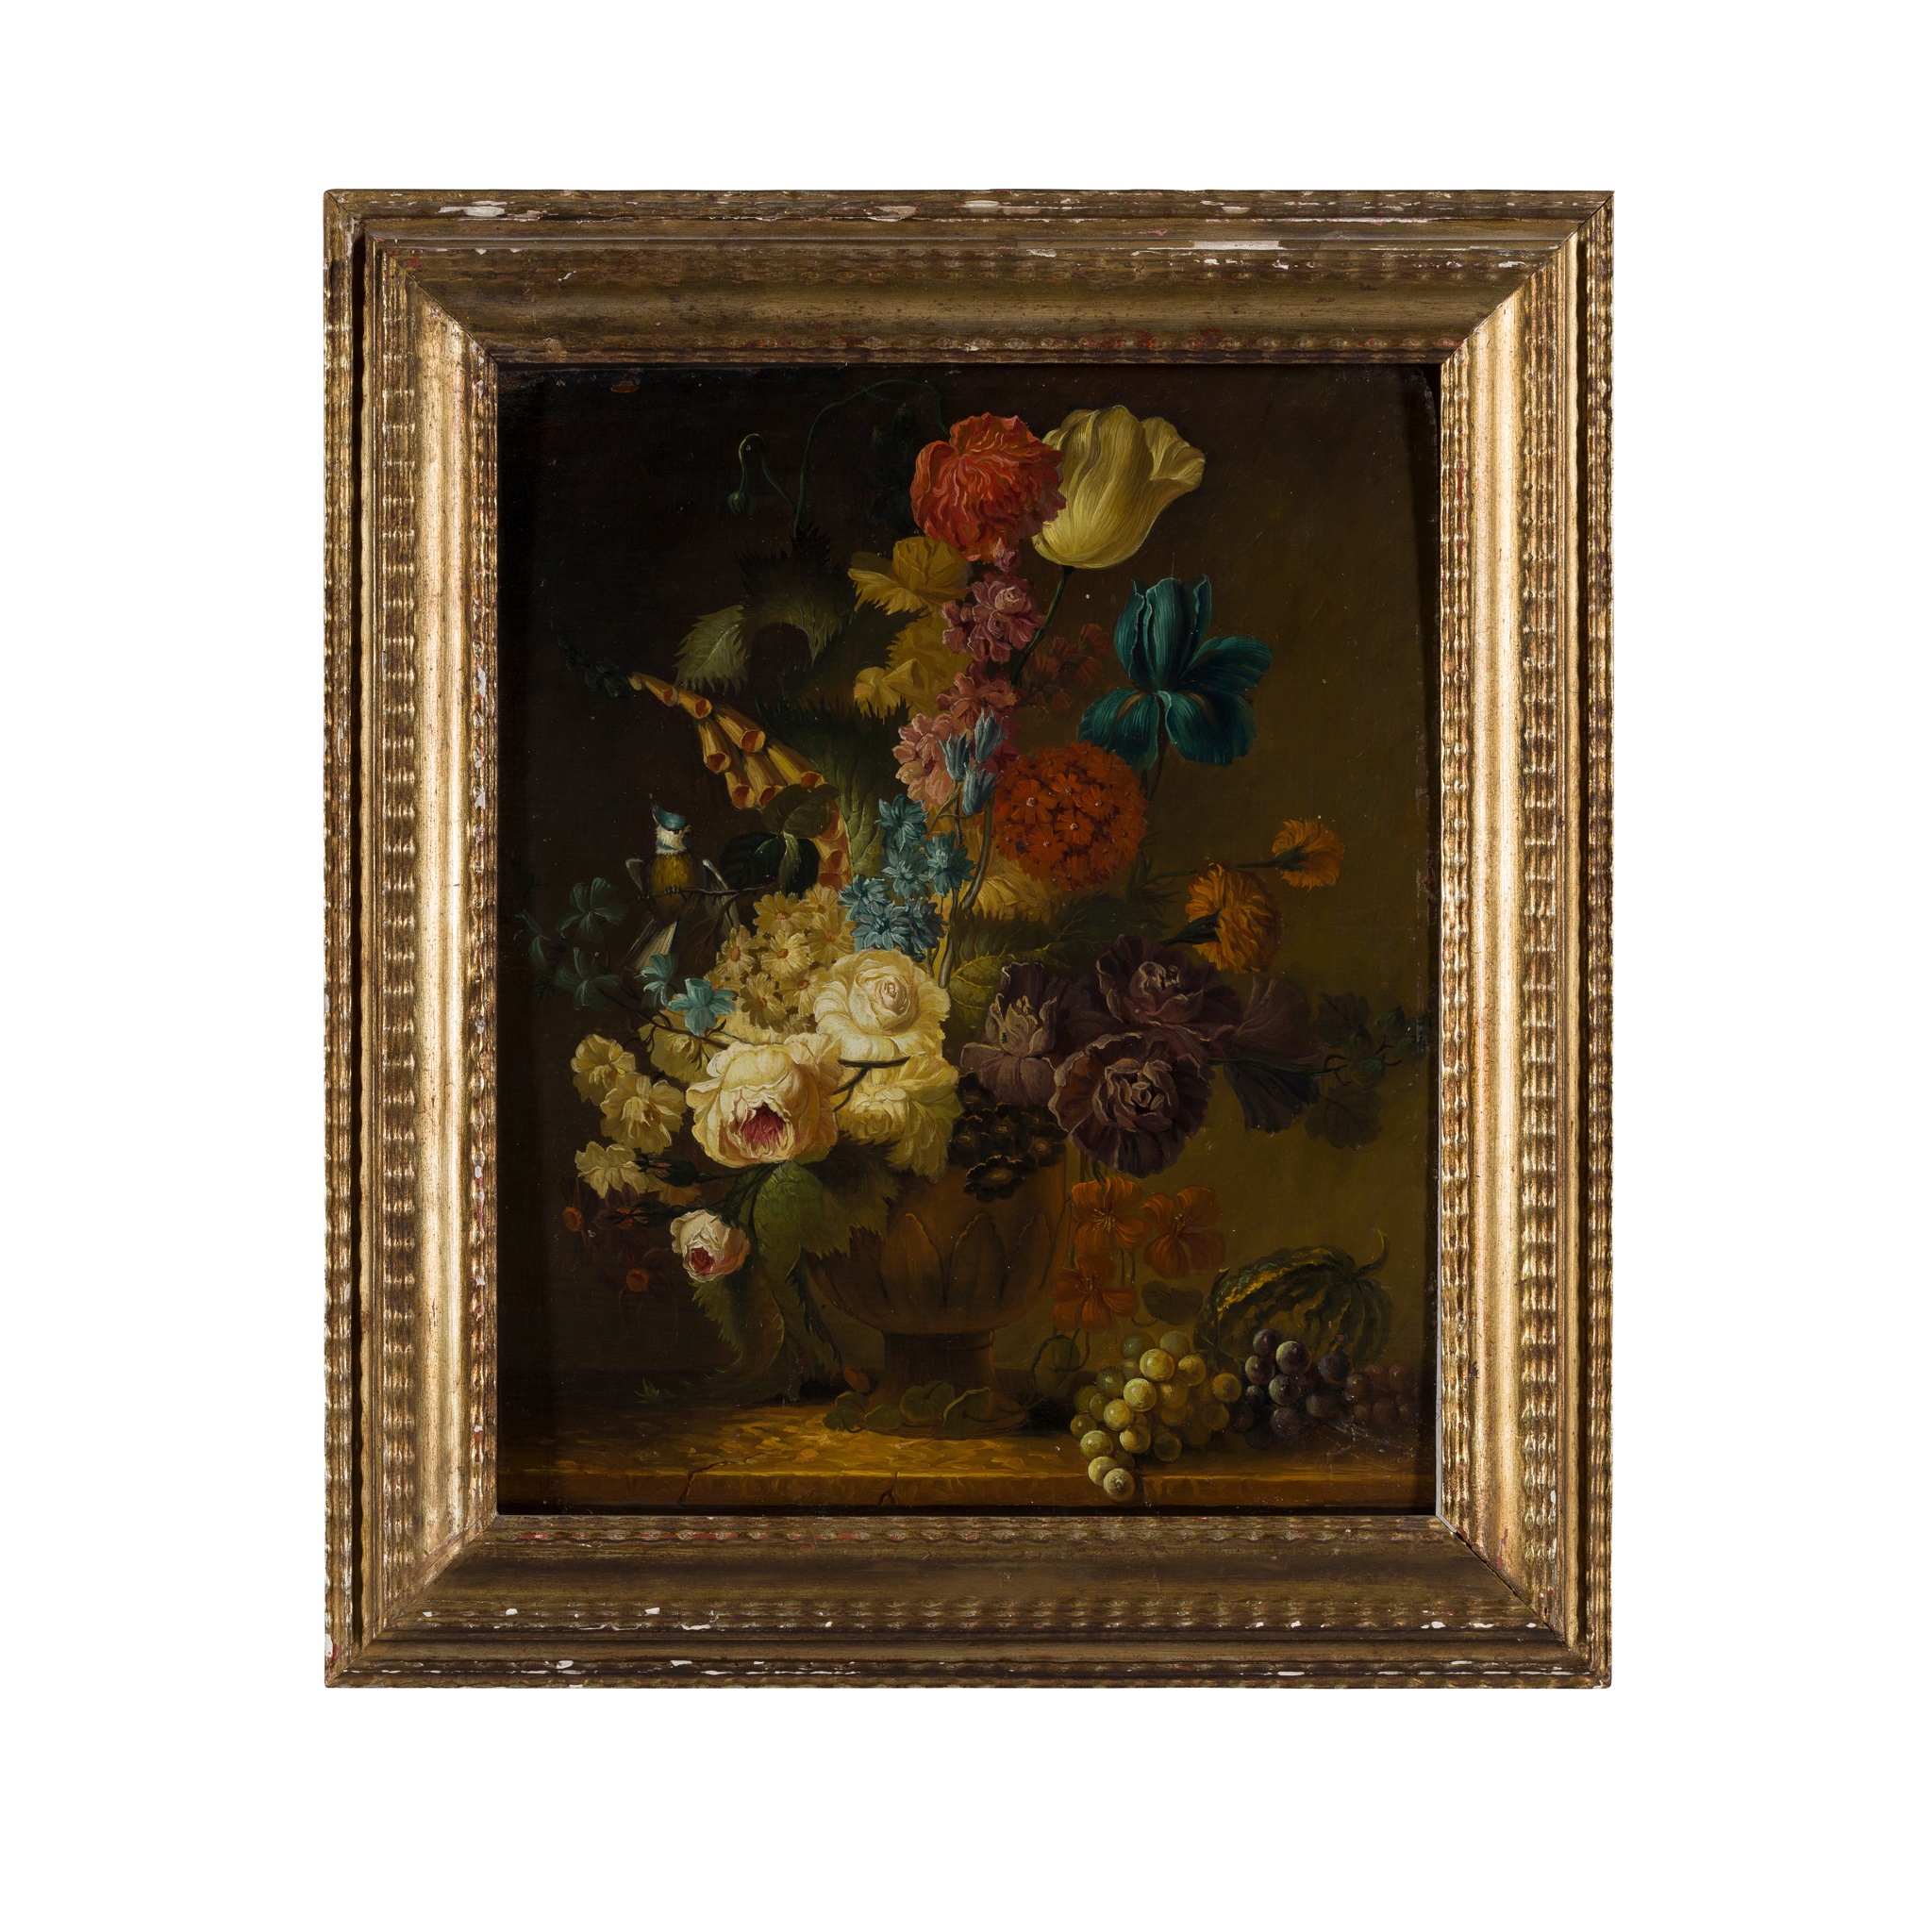 DUTCH SCHOOL (19TH CENTURY) STILL LIFE OF FLOWERS AND FRUIT IN A VASE - Image 2 of 2